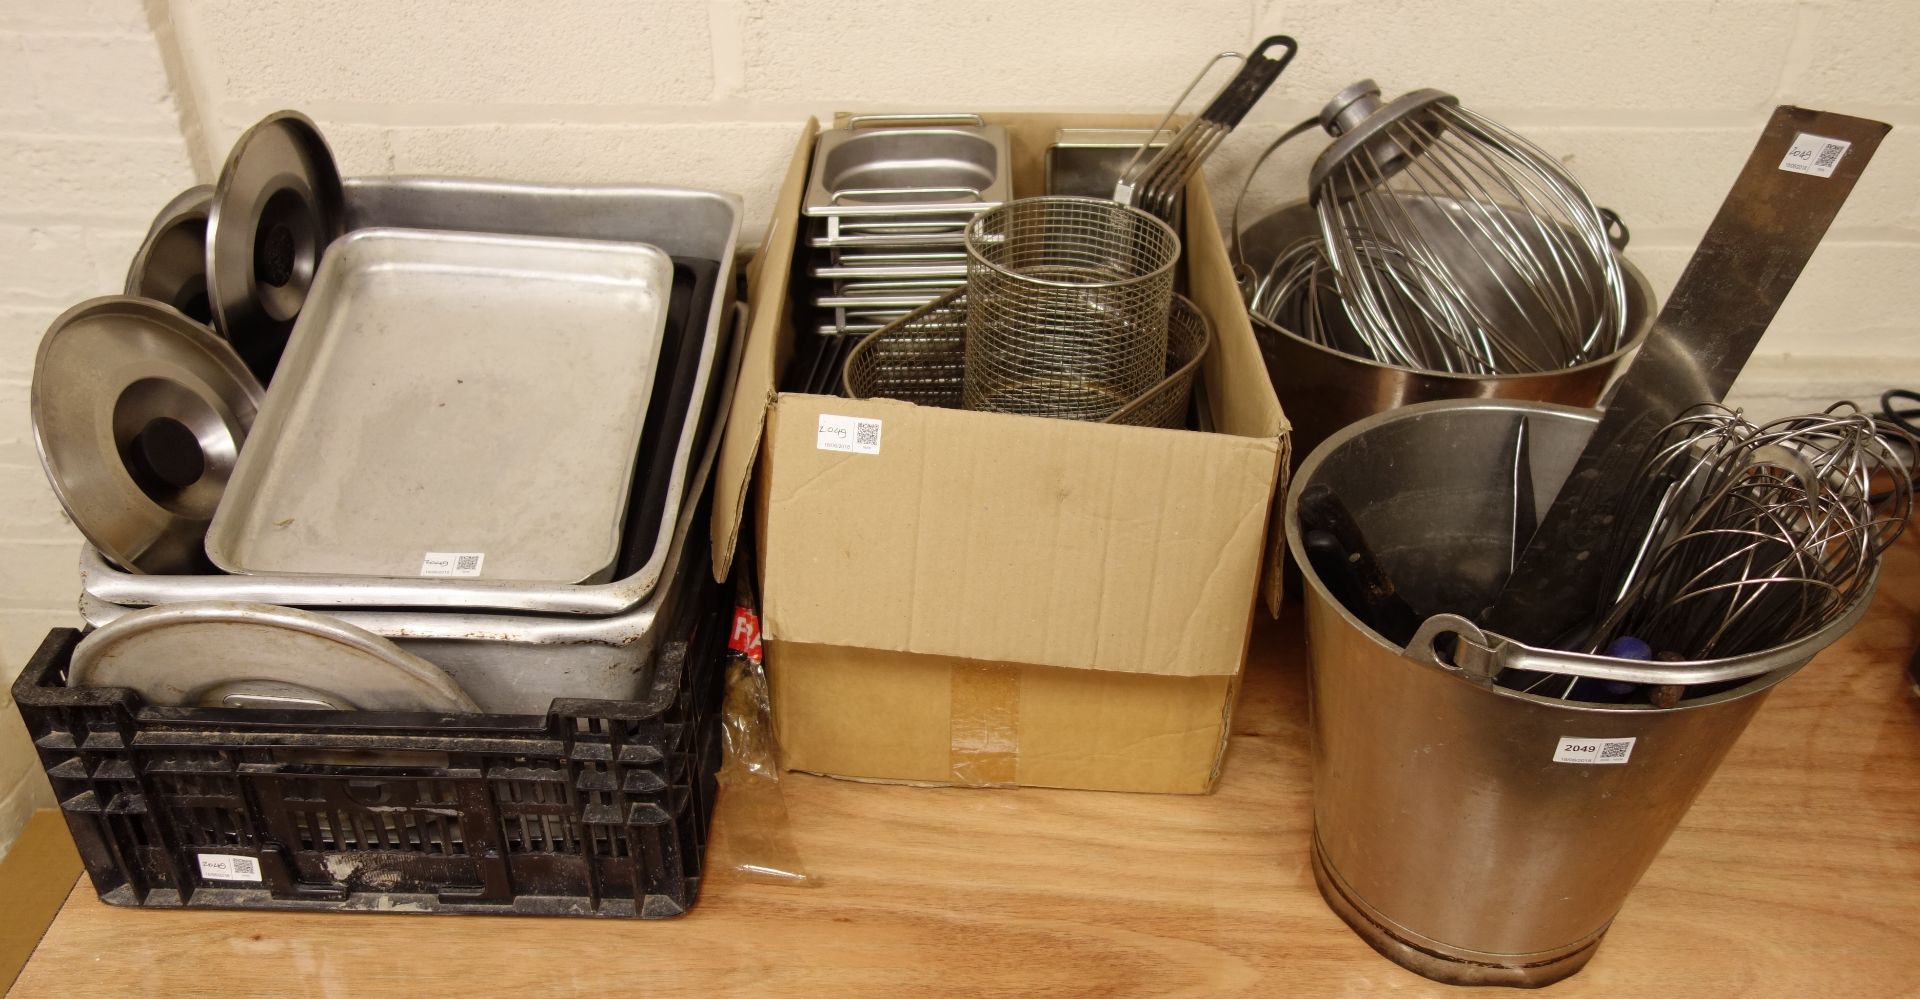 Two stainless steel buckets, kitchen knives, basket fryers, baking trays etc...